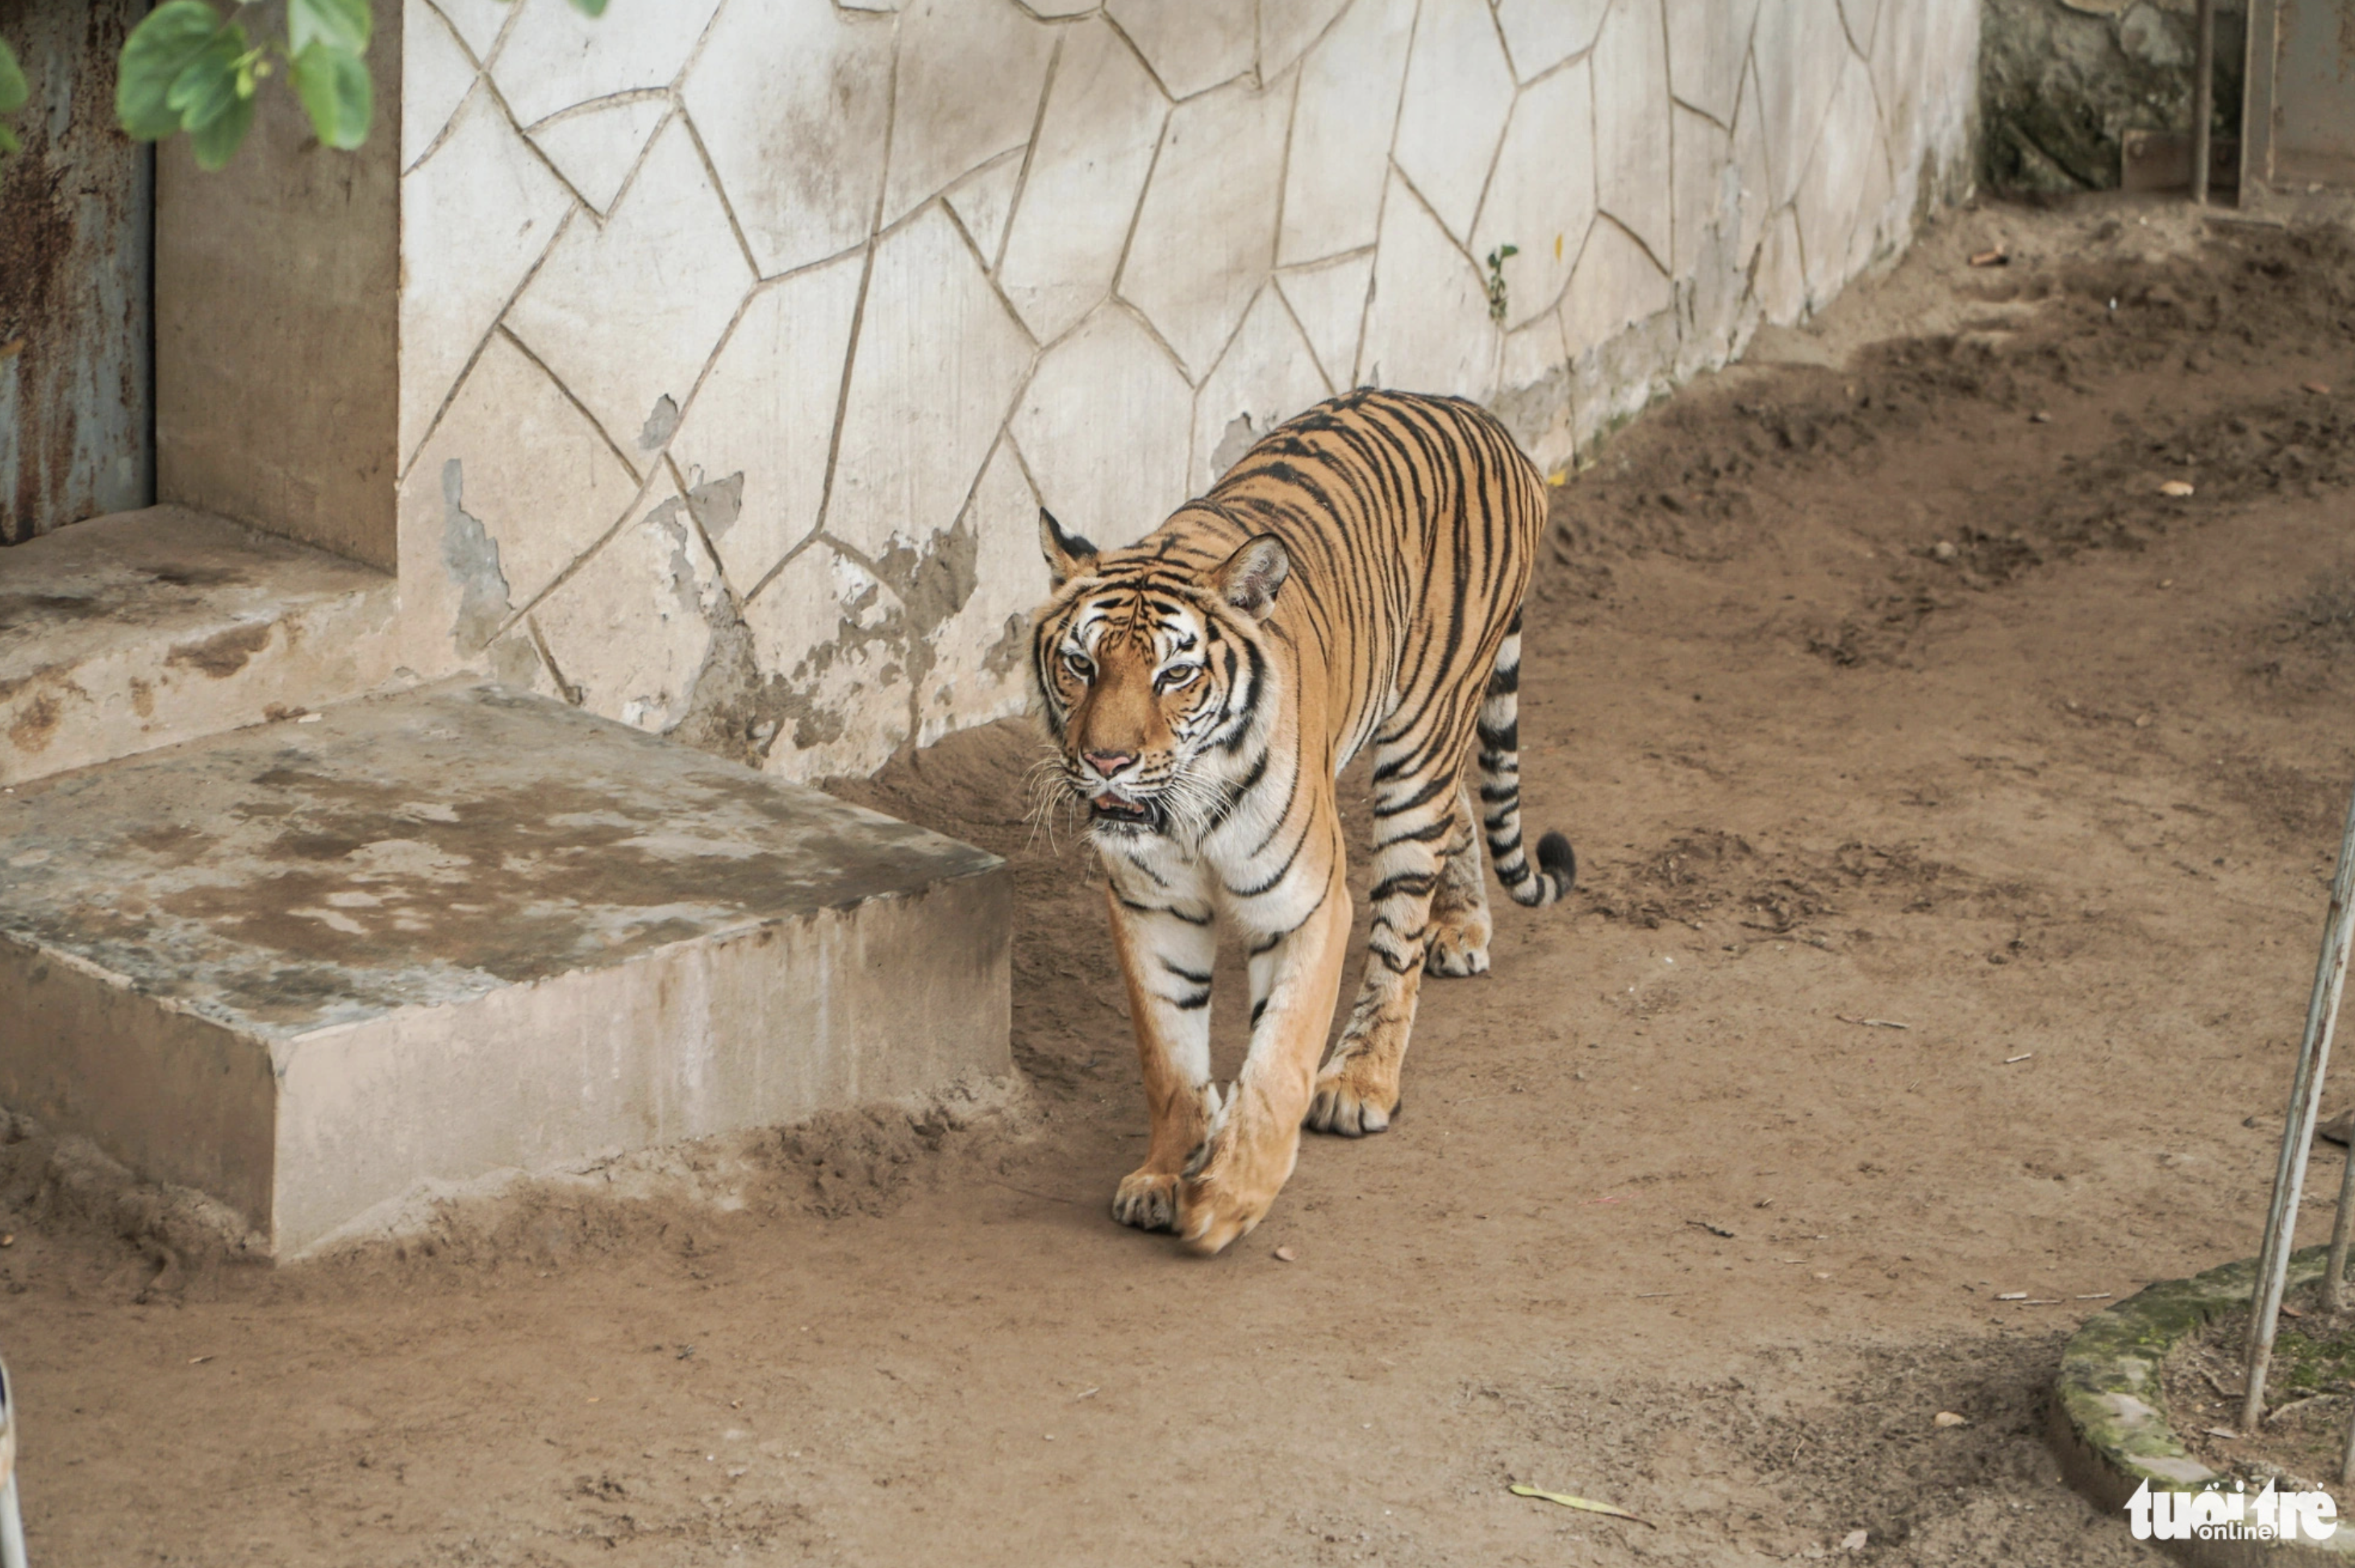 The tiger enclosure has heaters installed to keep the animals warm. Photo: Pham Tuan / Tuoi Tre